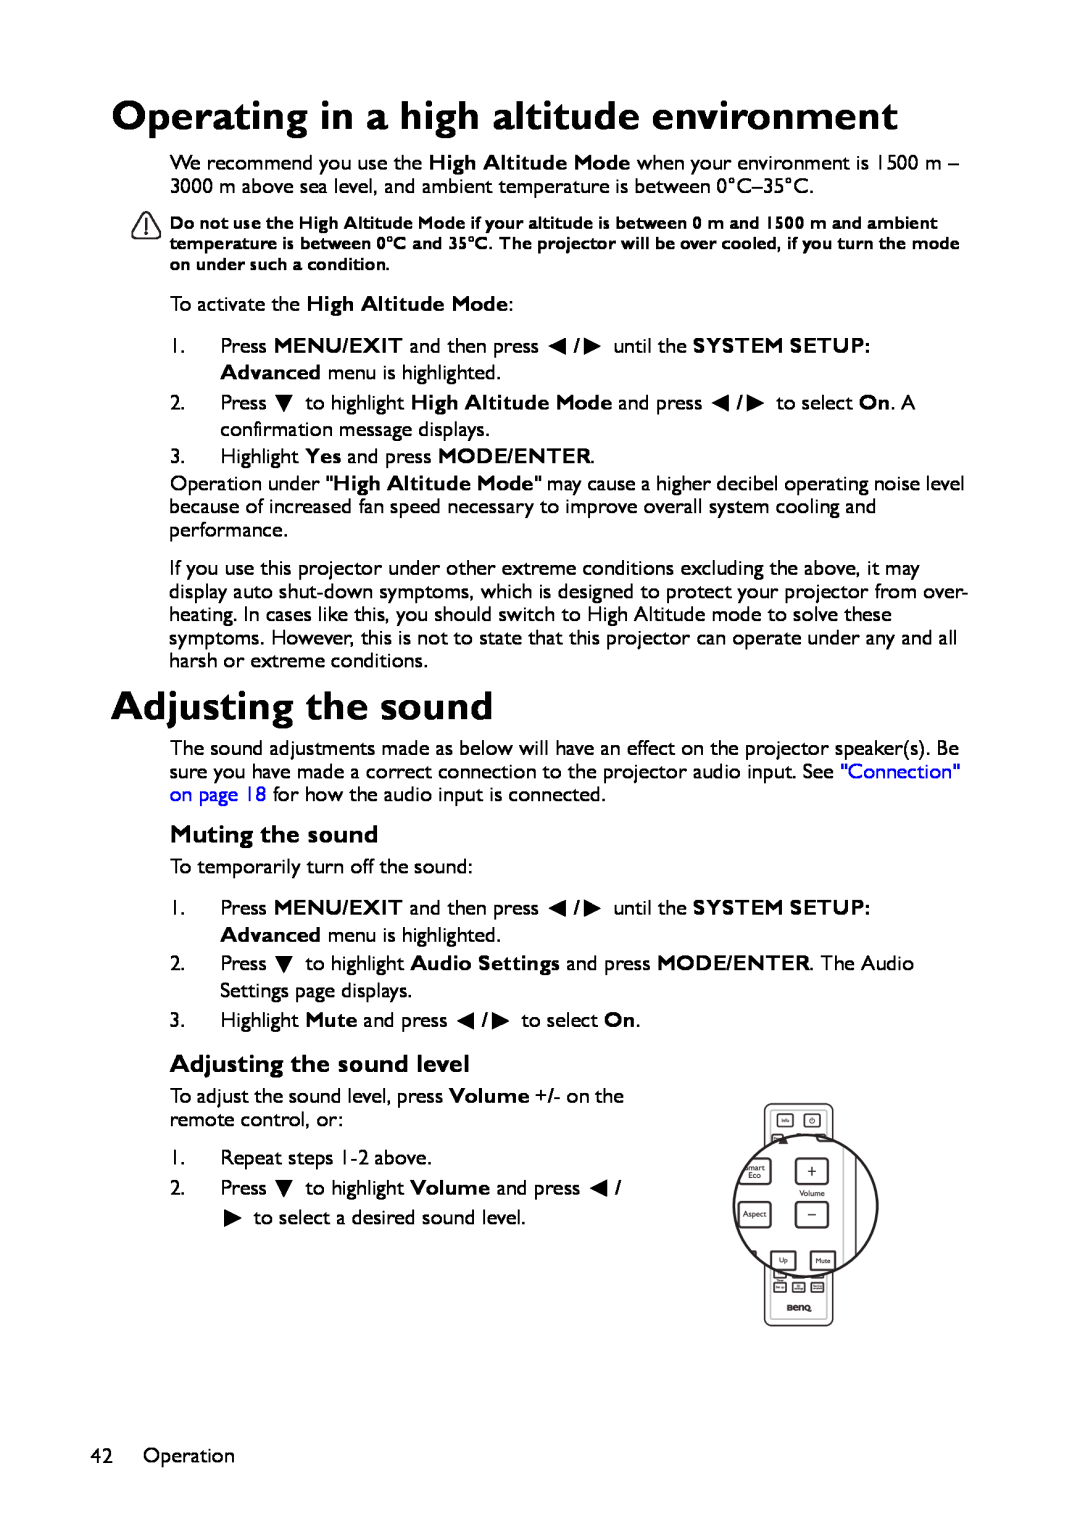 BenQ MS517 user manual Operating in a high altitude environment, Muting the sound, Adjusting the sound level 